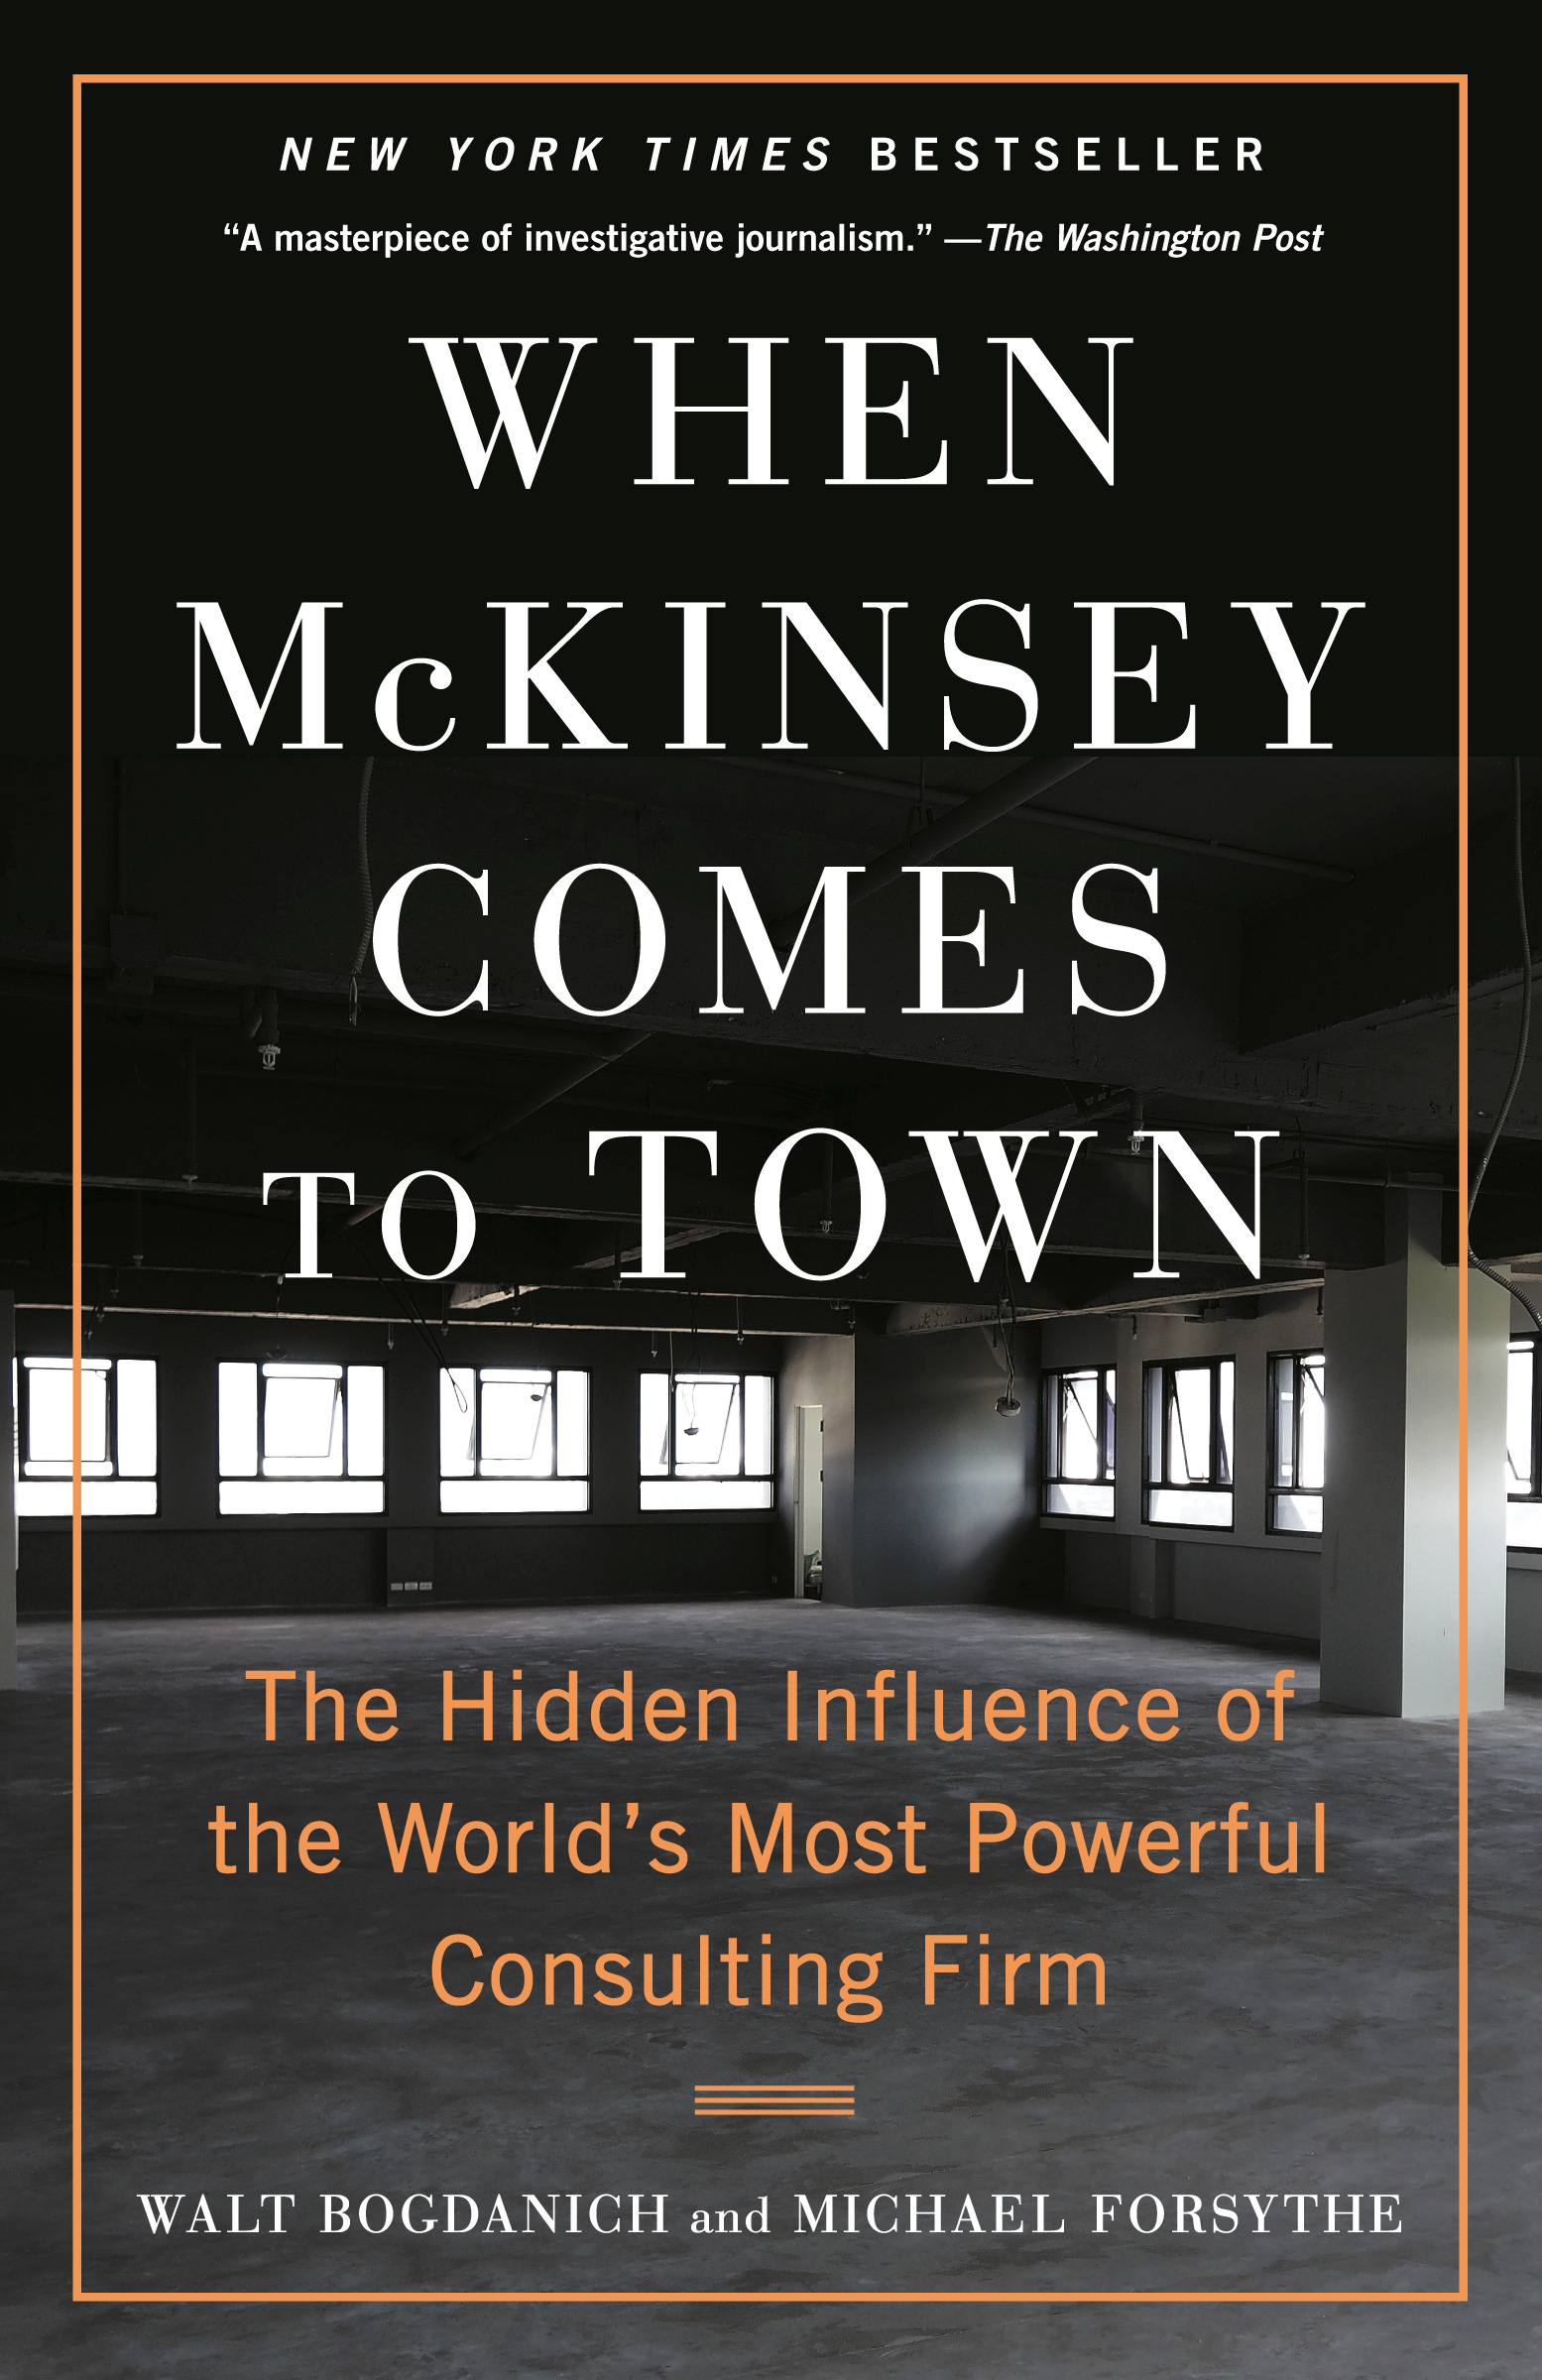 When McKinsey Comes to Town : The Hidden Influence of the World's Most Powerful Consulting Firm | Bogdanich, Walt (Auteur) | Forsythe, Michael (Auteur)